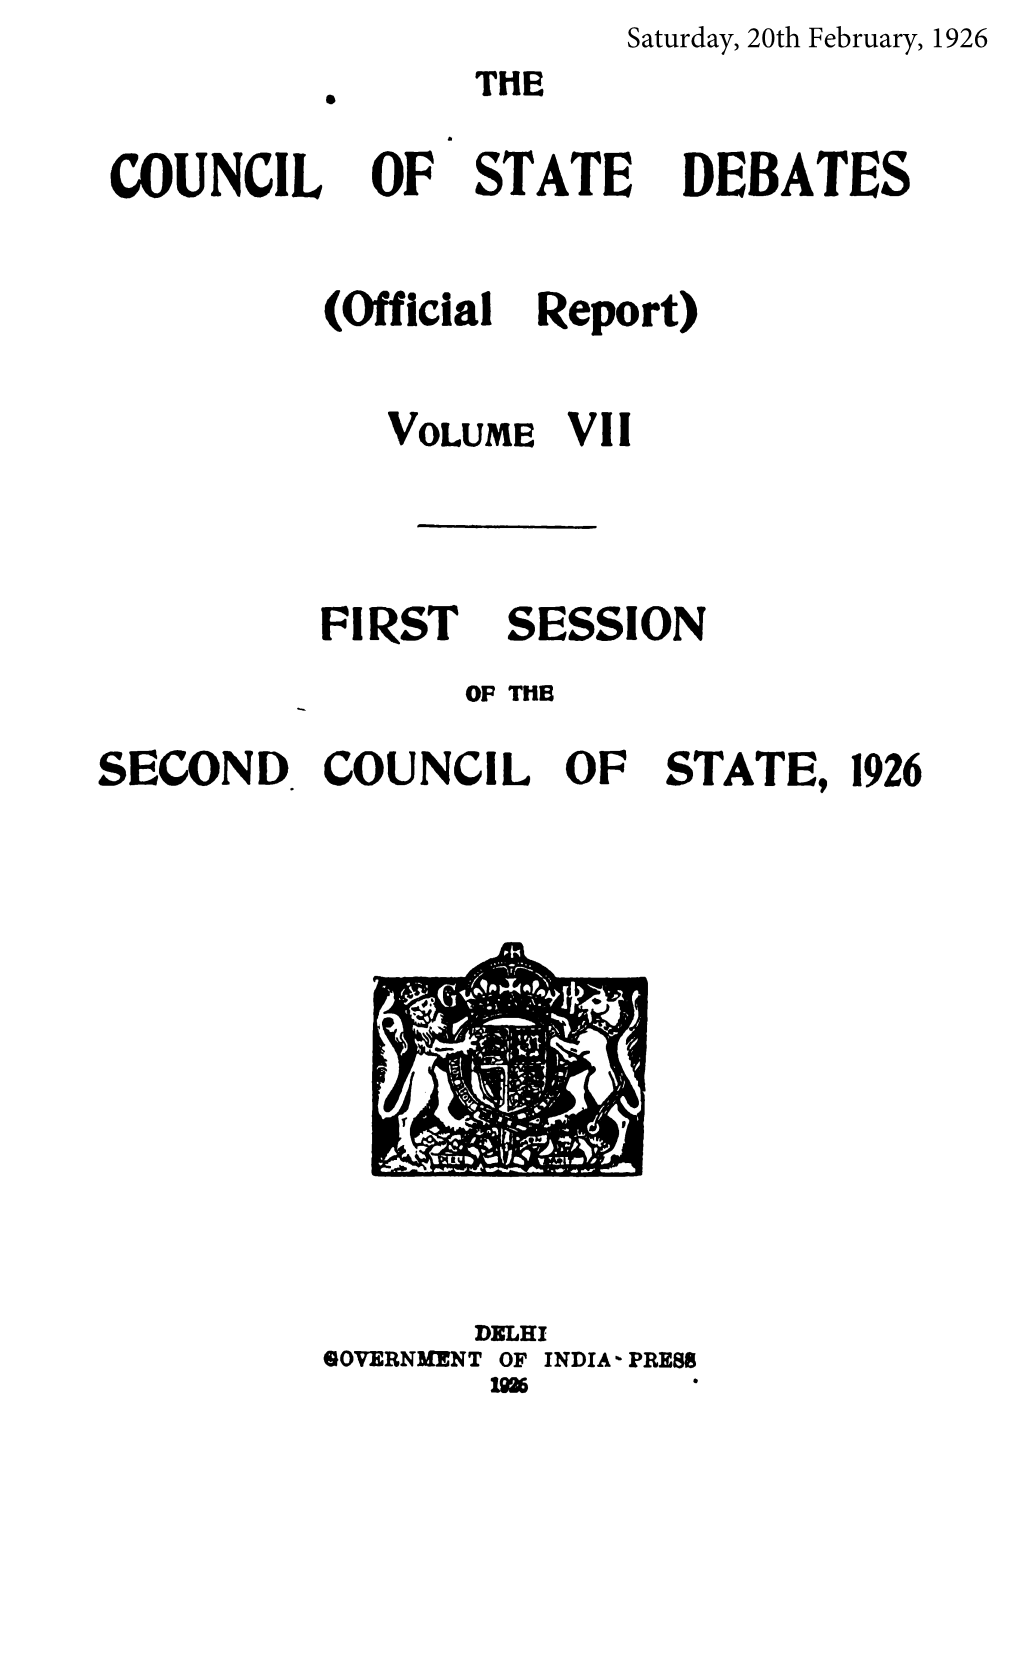 Council of State Debates